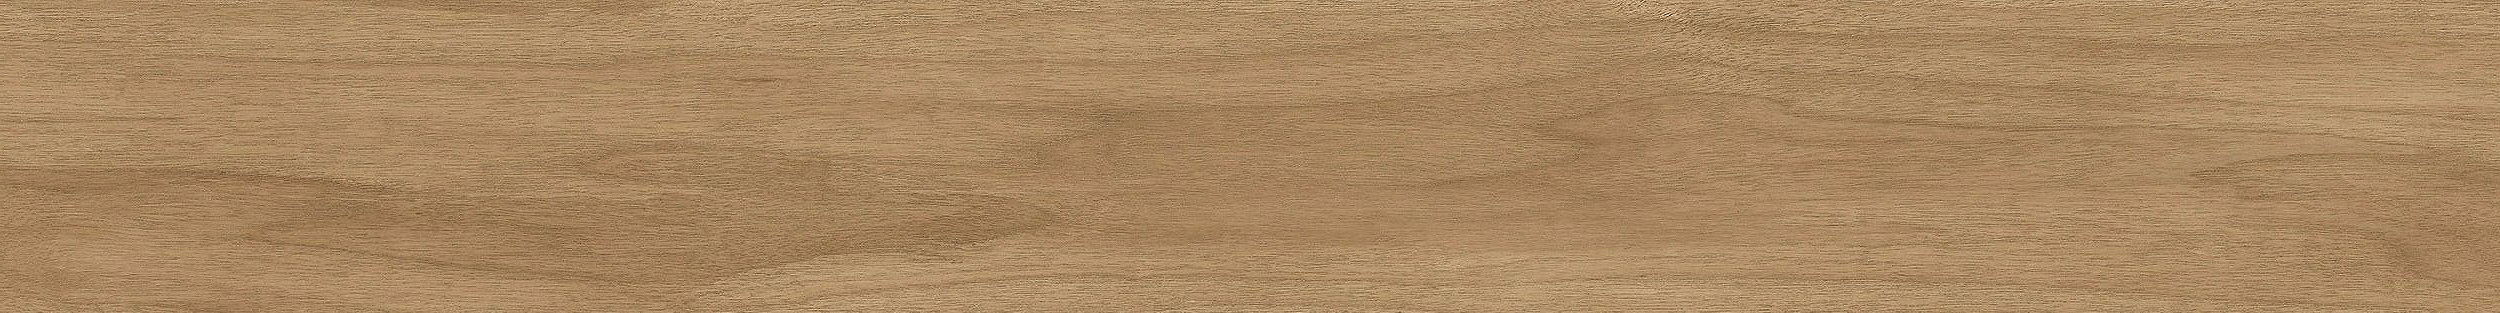 Criterion Classic Woodgrains LVT In Washed Maple image number 4